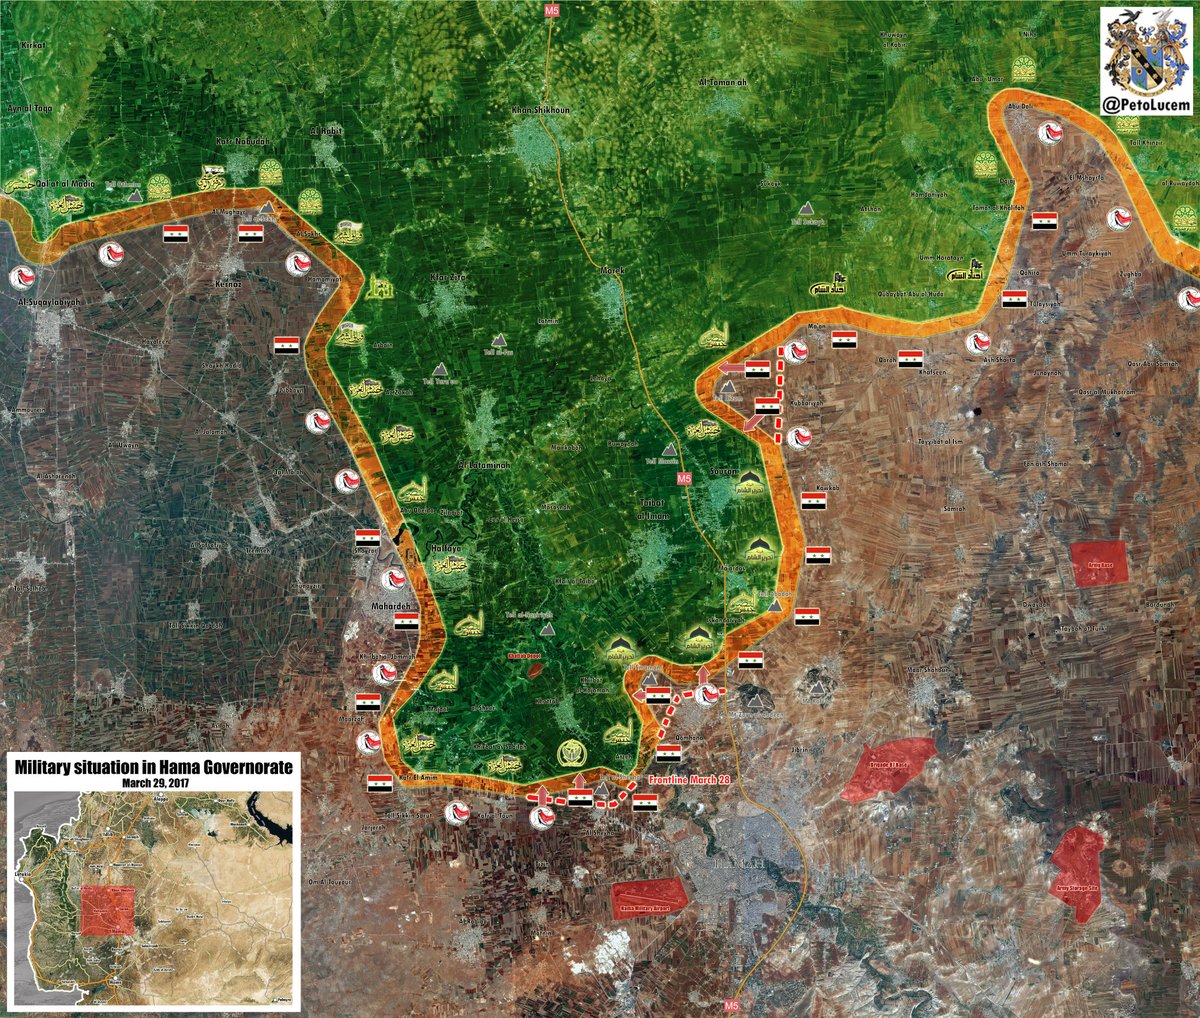 Heavy Clashes Between Syrian Army And HTS-led Forces Ongoing In Northern Hama (Video, Map)